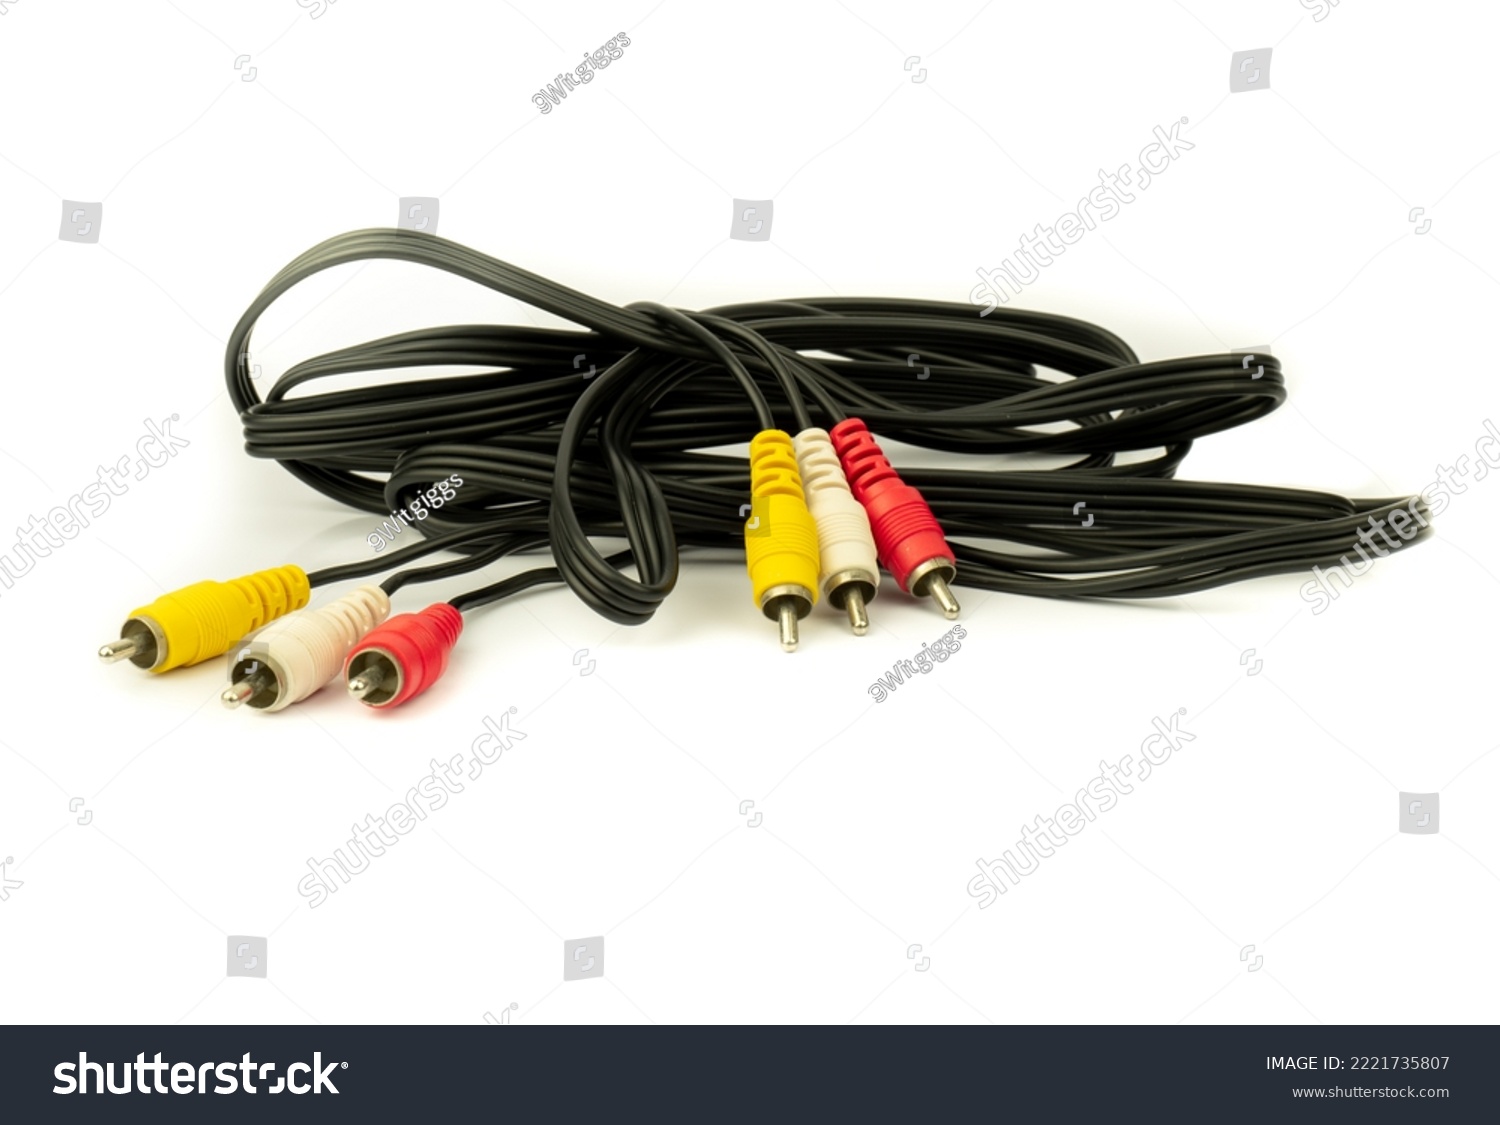 RCA cable connector, RCA connector on white Background, Red white Yellow connector Jack, Signal cable jack, Audio and Video cable on white background. #2221735807